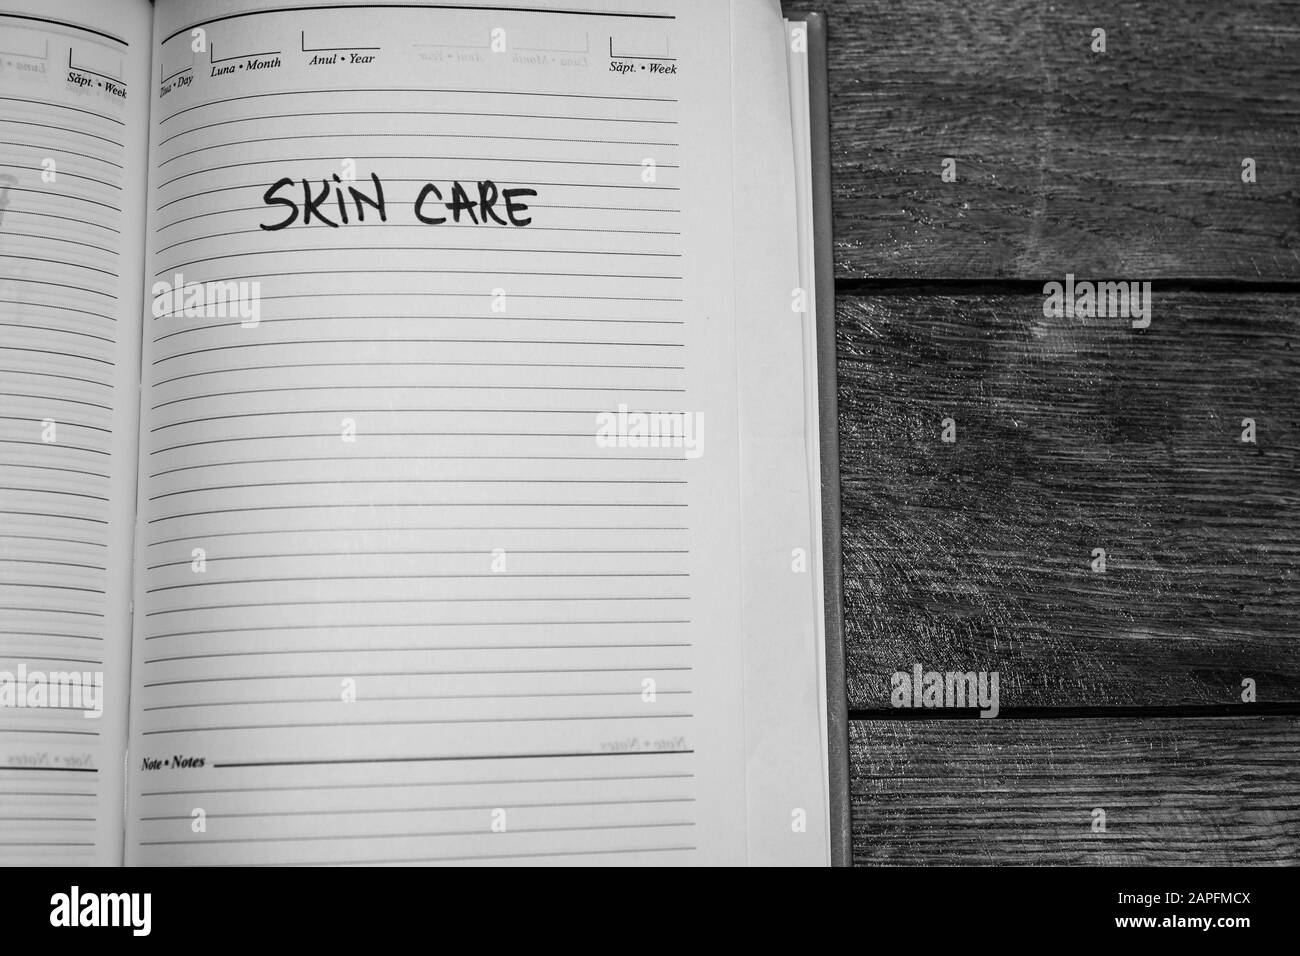 Skin care, handwriting text on page of office agenda. Copy space. Stock Photo